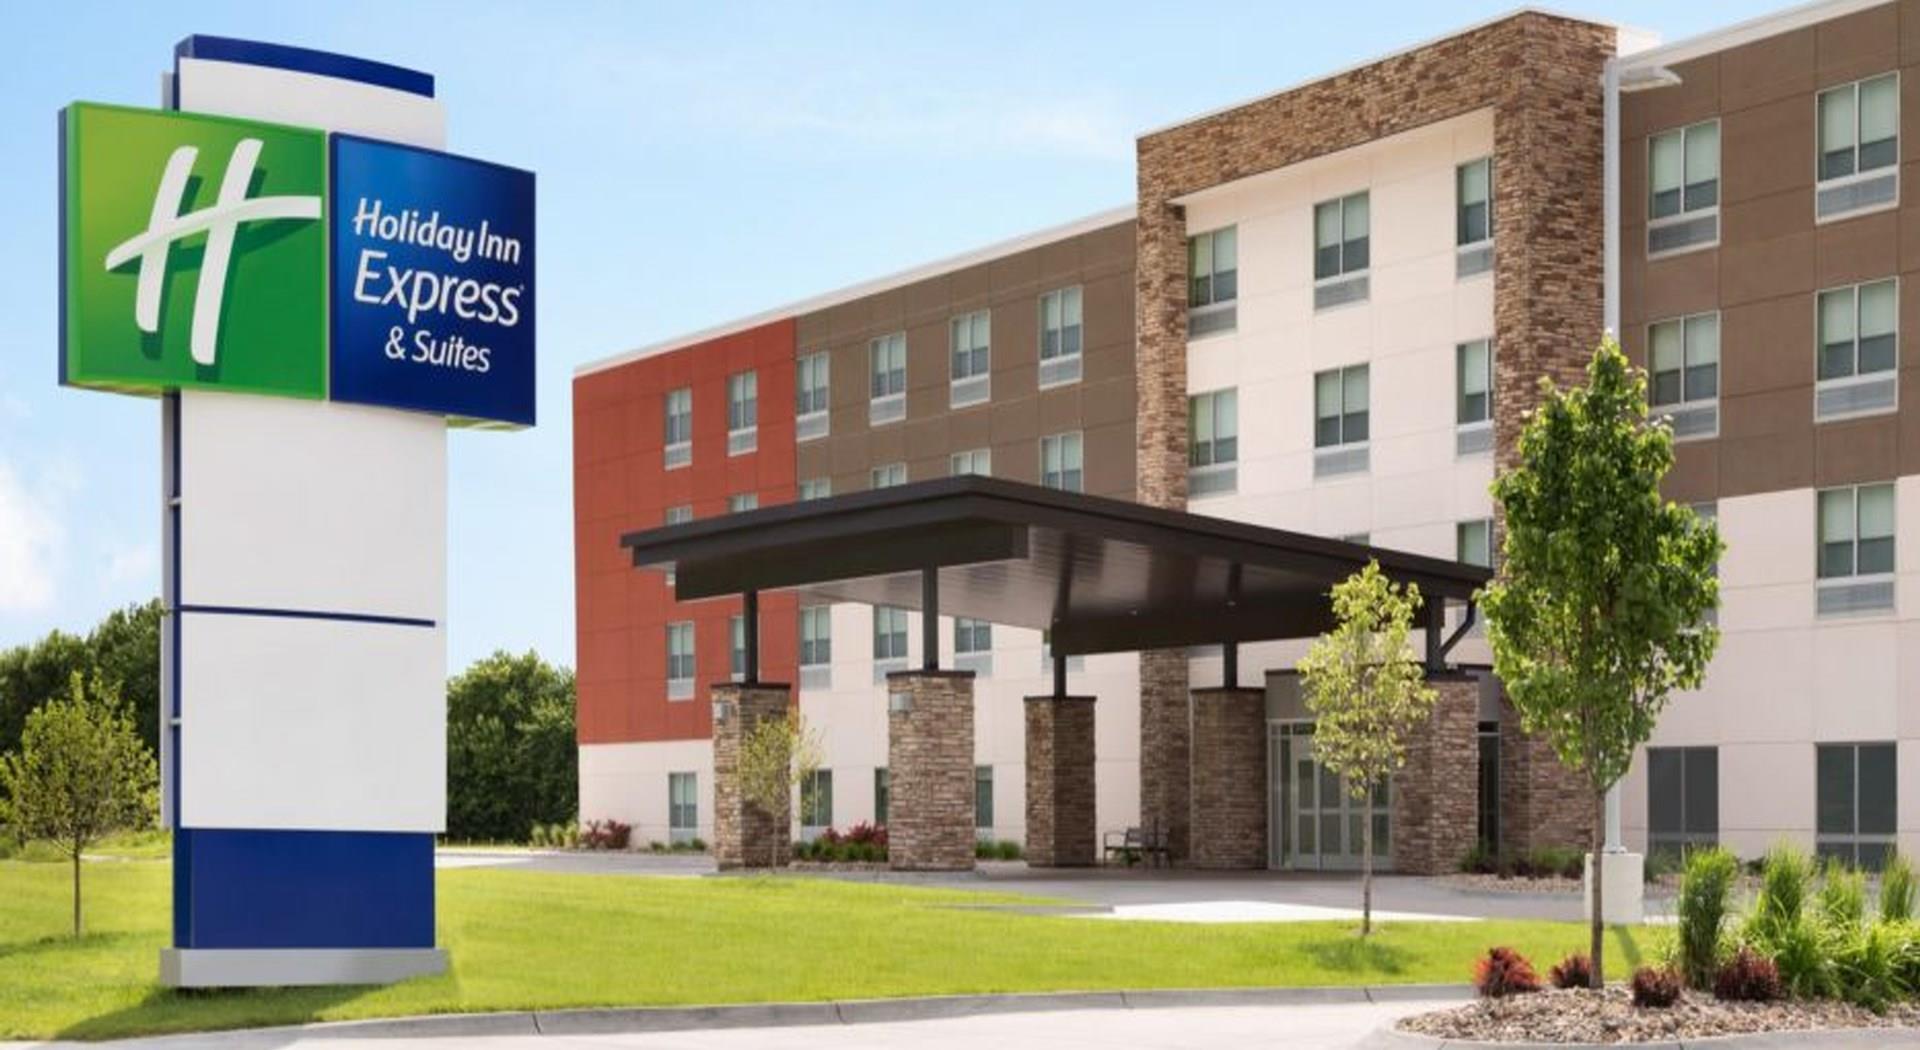 Holiday Inn Express Chelmsford in Chelmsford, MA